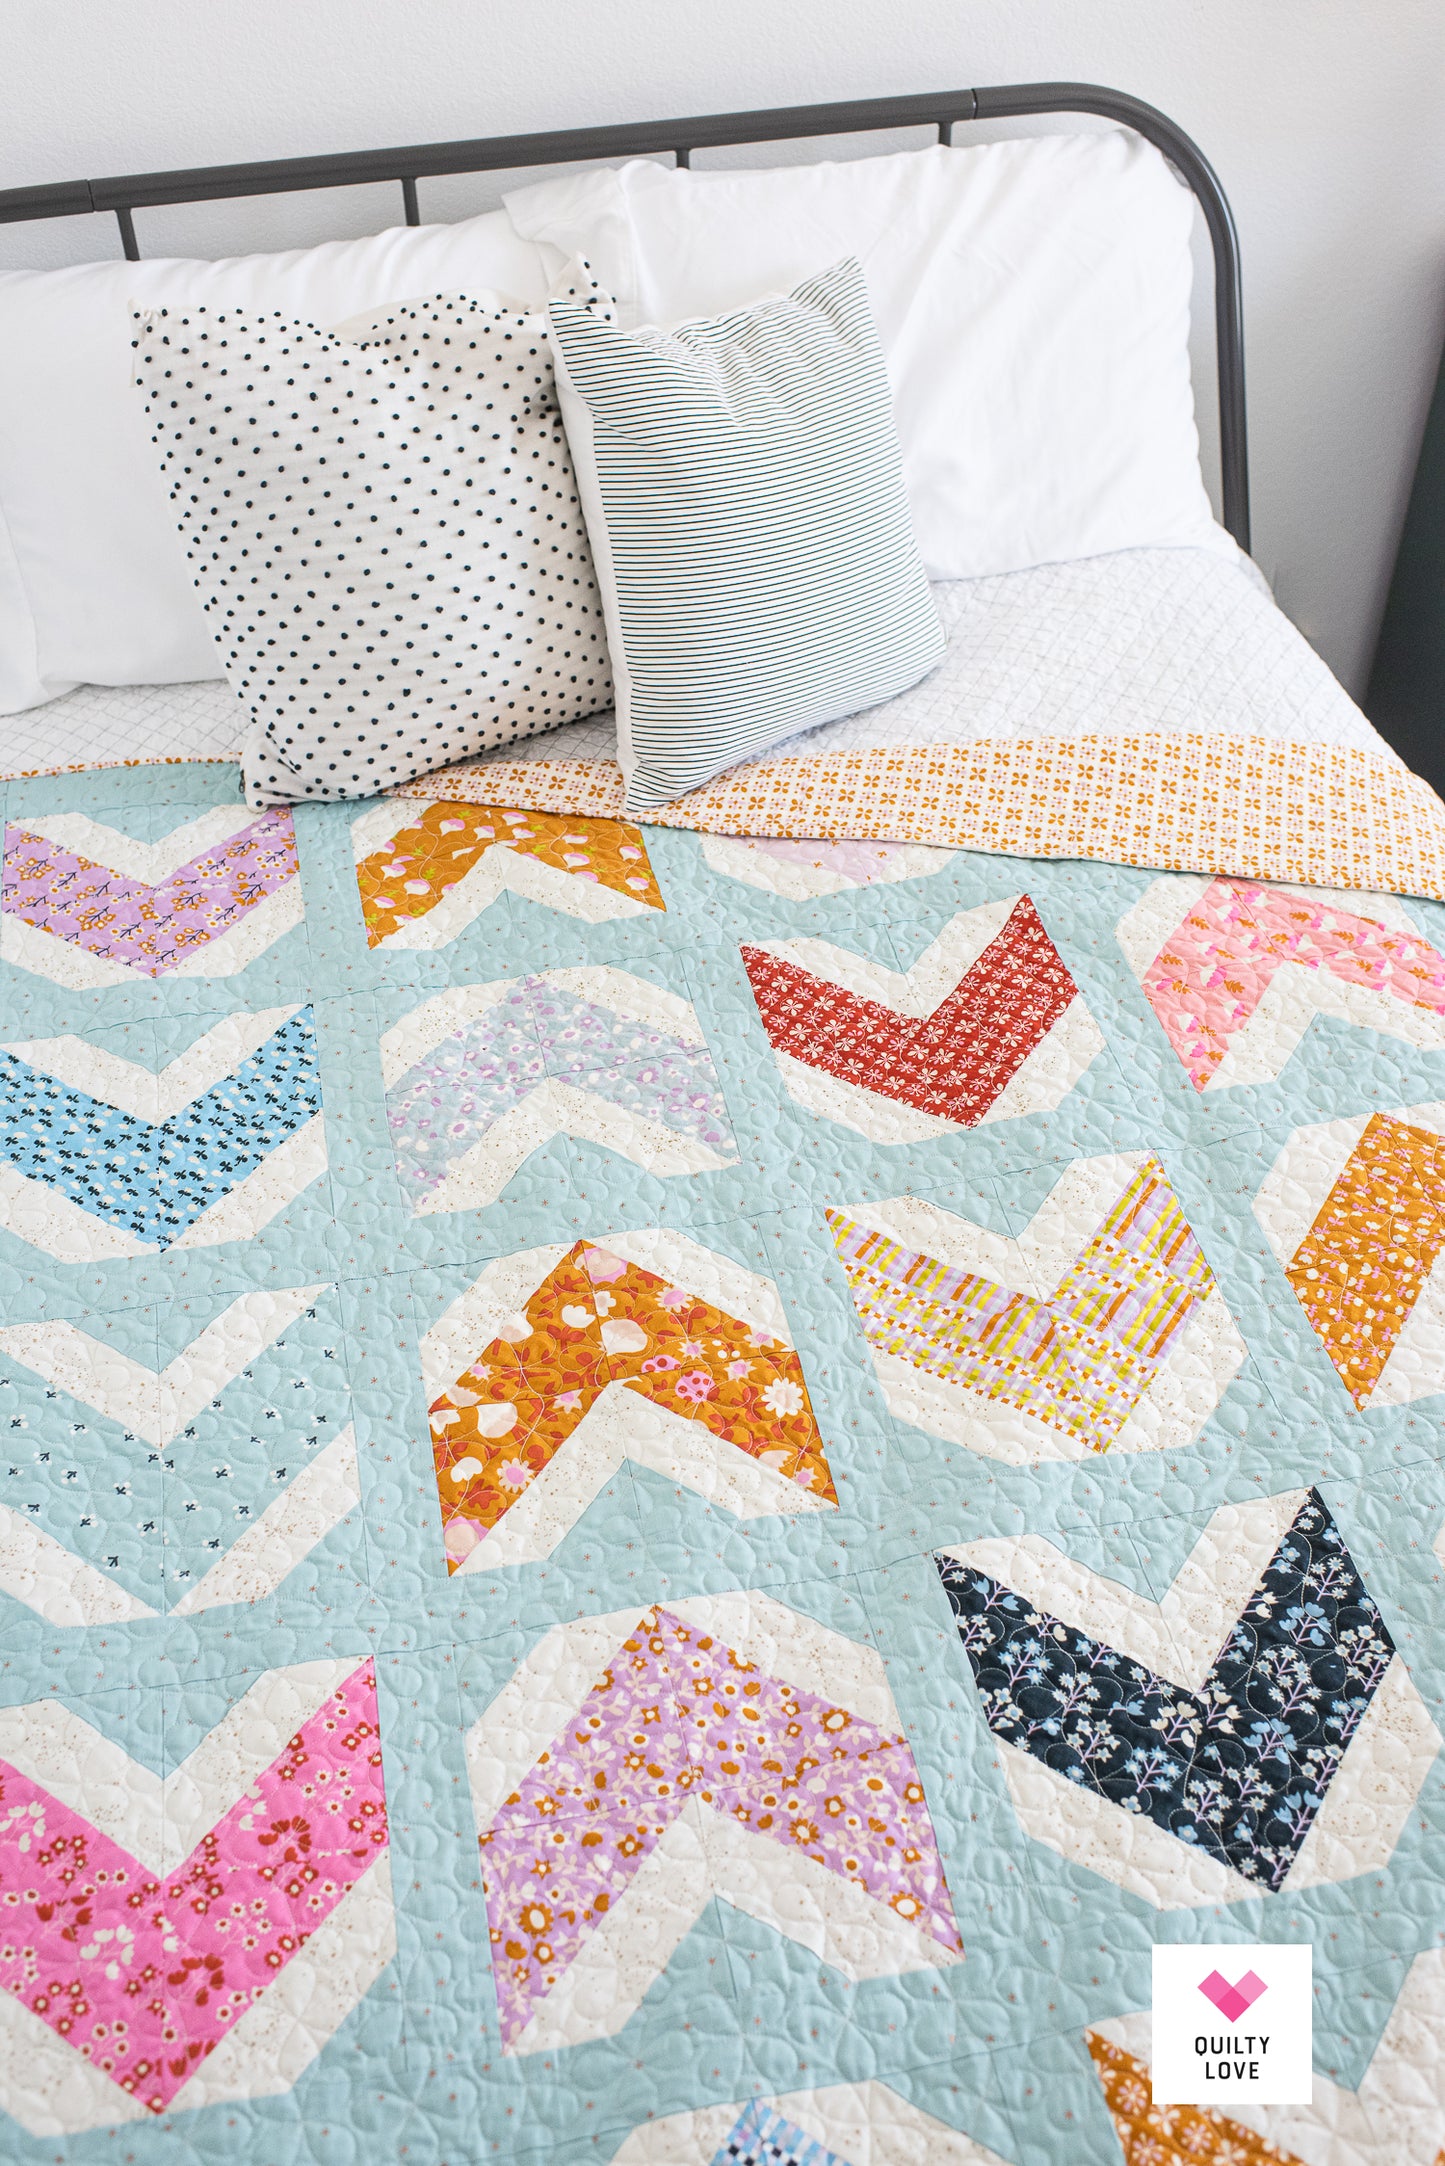 Quilty Arrows PDF quilt pattern